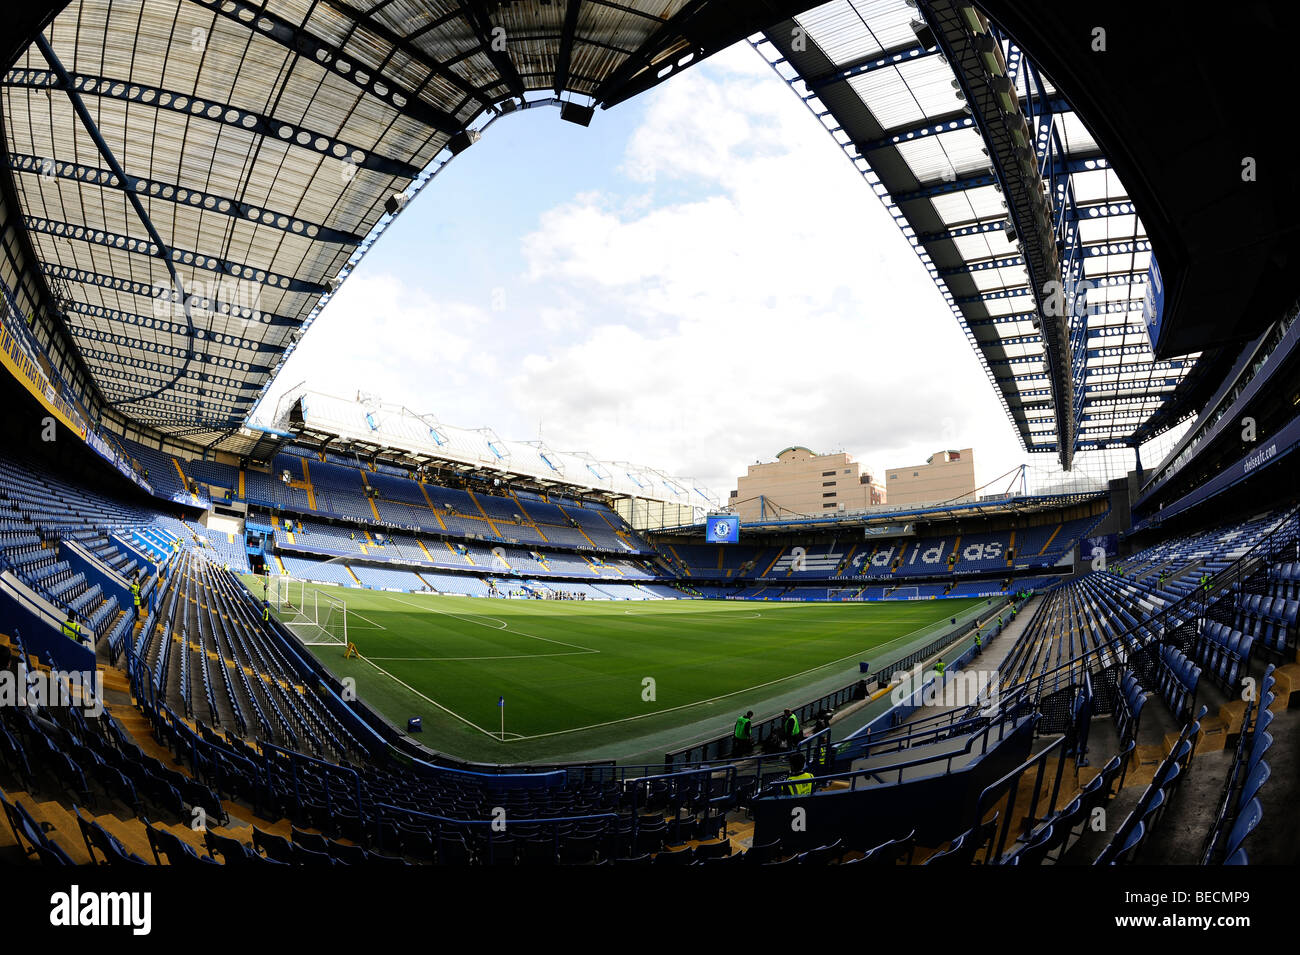 London, UK - October 16, 2011: Stand Of Stamford Bridge, Home Ground Of  Chelsea F.C. Stock Photo, Picture and Royalty Free Image. Image 63164873.